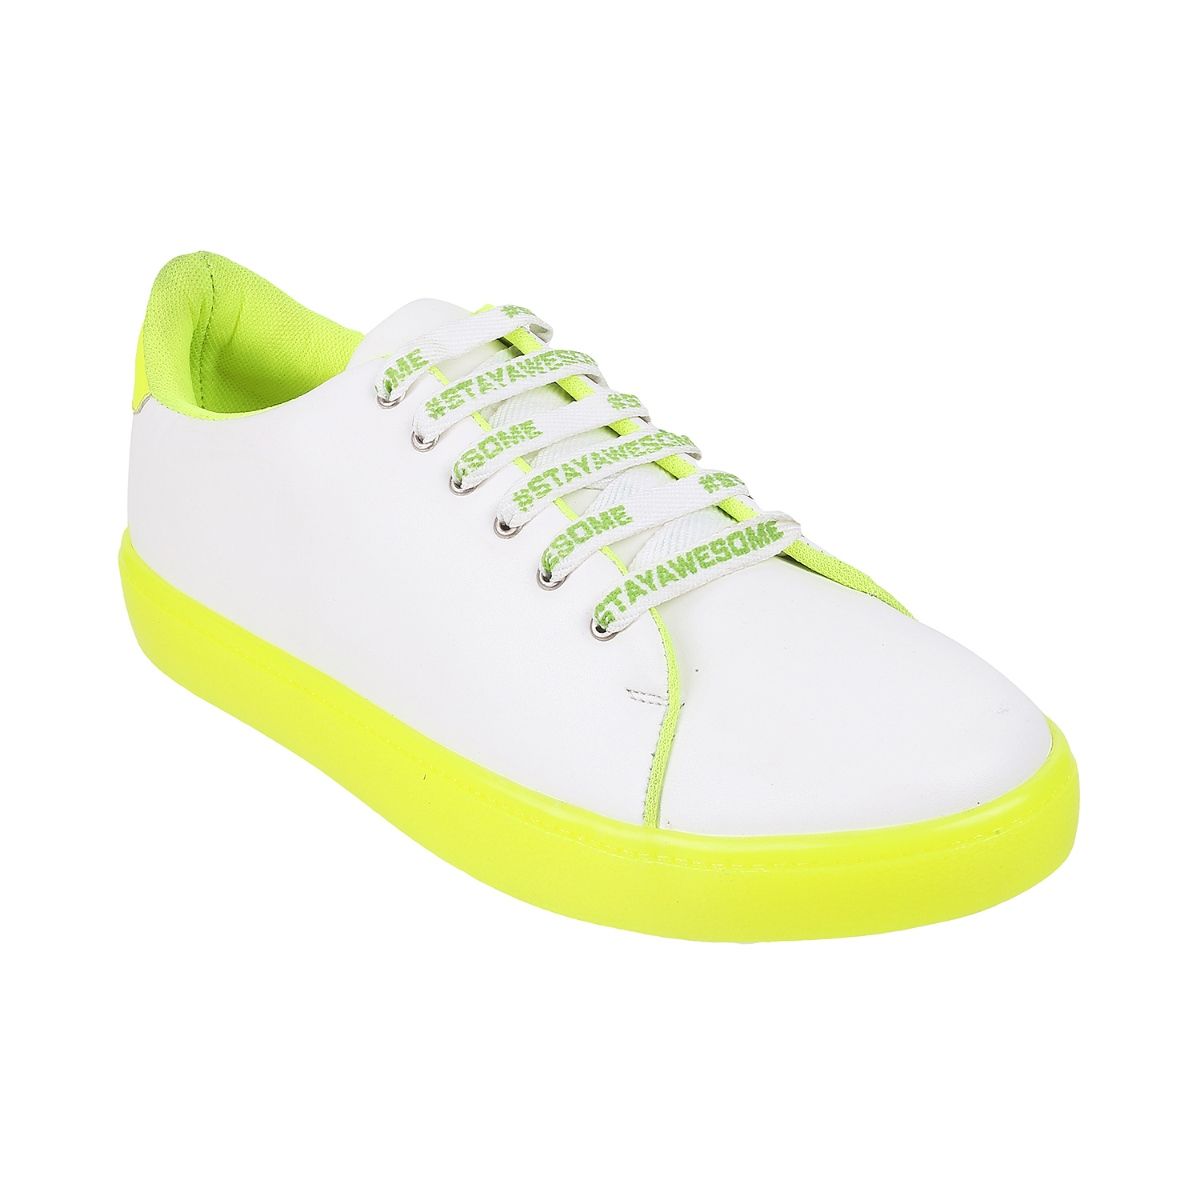 Buy Sneakers Shoes for Girls Online | White , Black Sneakers for Girls |  Mochi Shoes